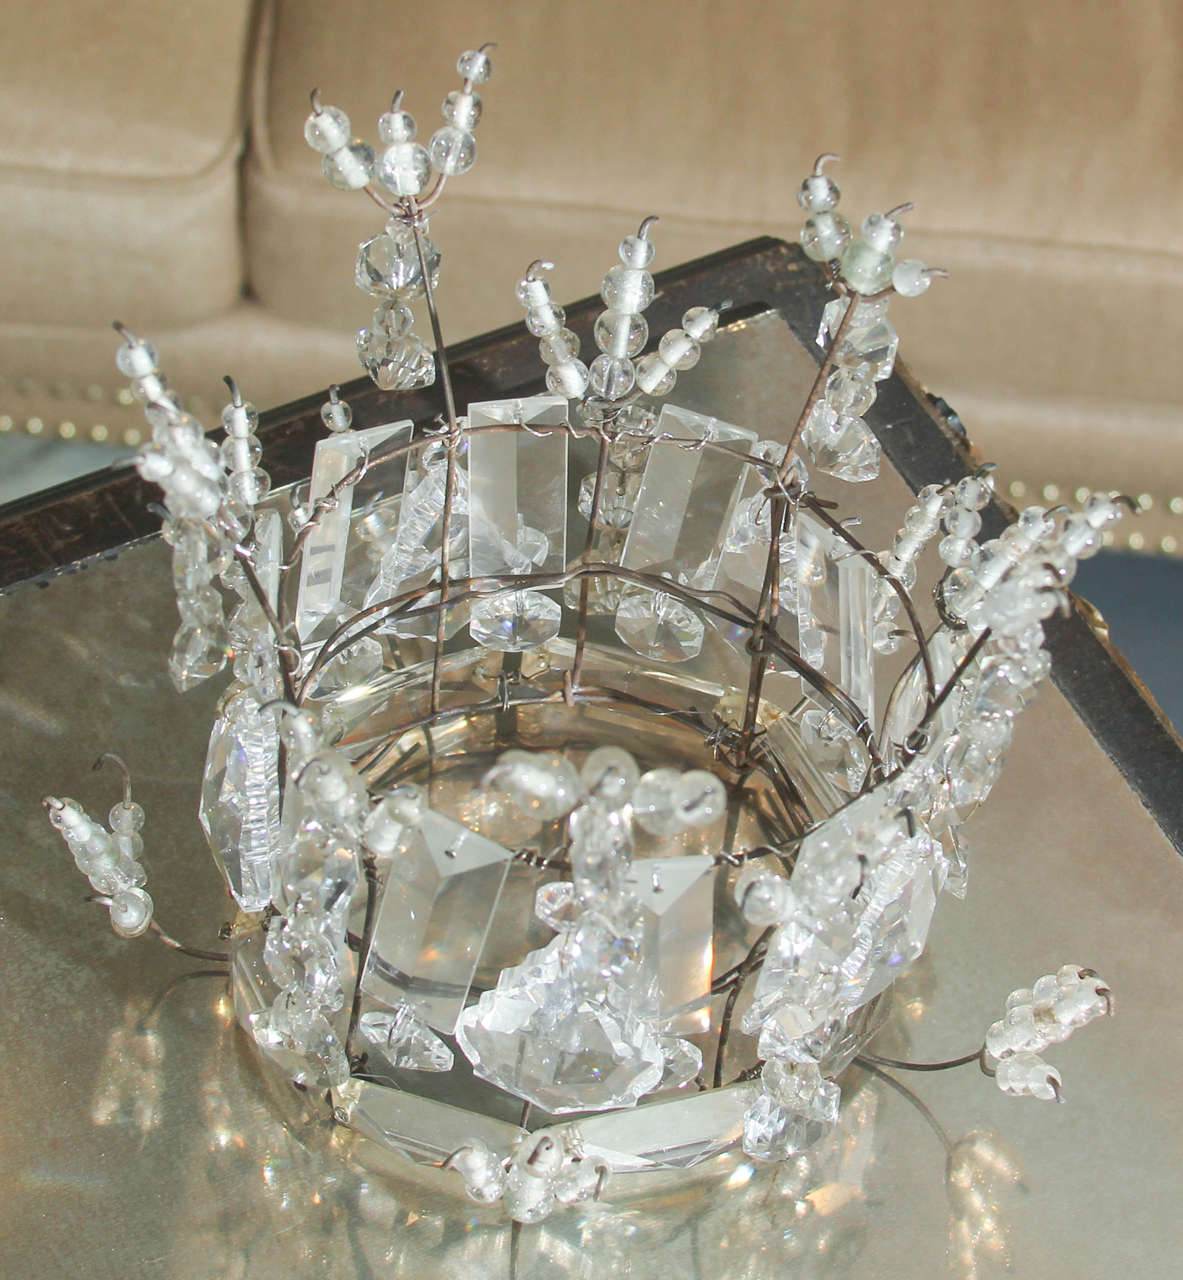 Decorative crown of vintage and antique crystal beads and crystals, lovely found object.